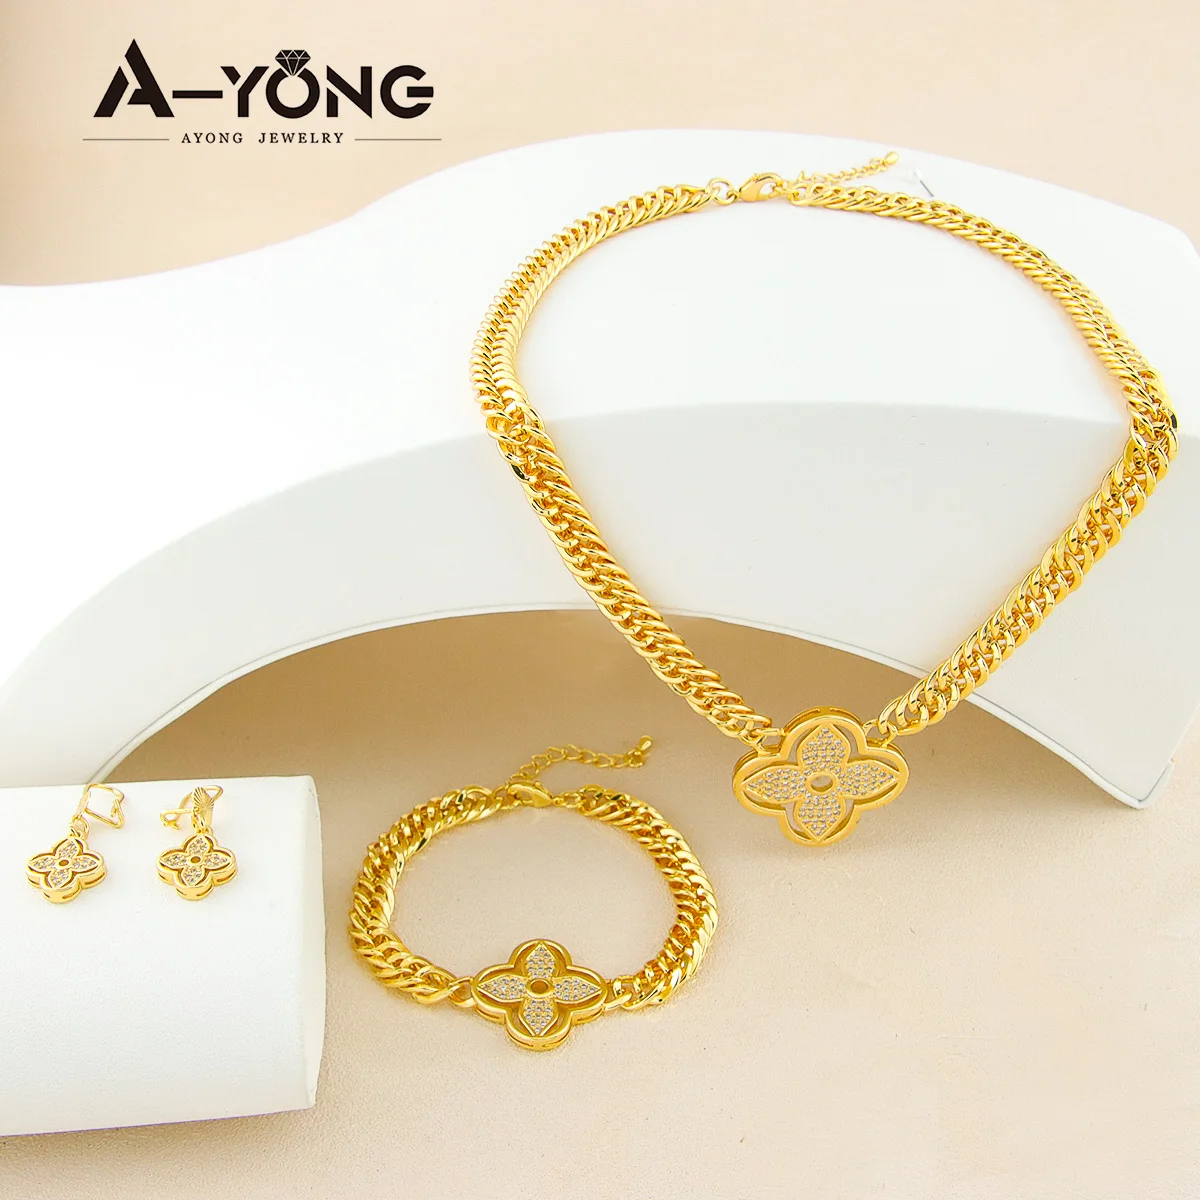 Wholesale 18k Gold Plated Women's Gift Four Leaf Clover Bracelet From  m.alibaba.com